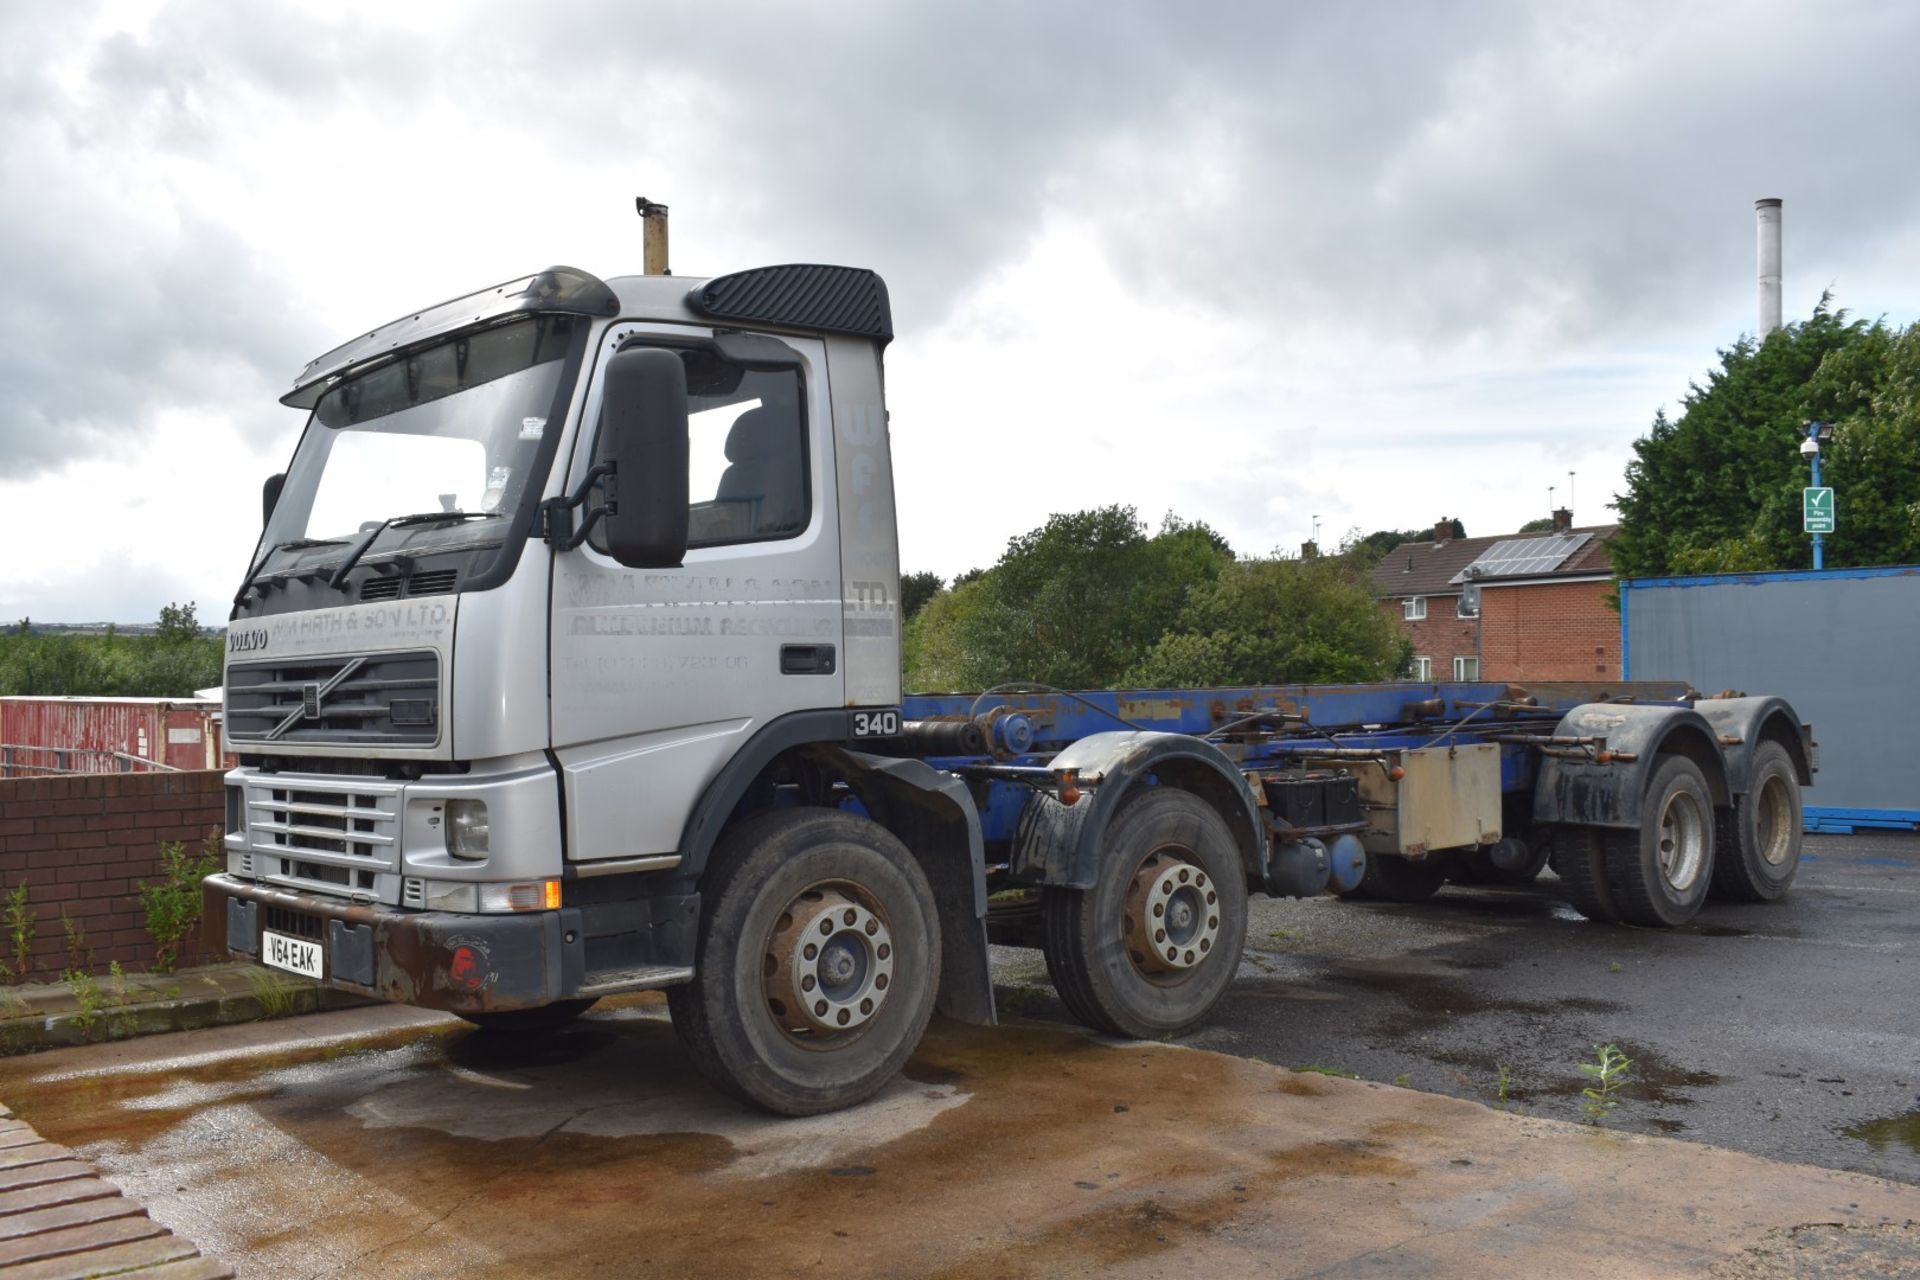 1 x Volvo 340 Plant Lorry With Tipper Chasis and Fitted Winch - CL547 - Location: South Yorkshire.